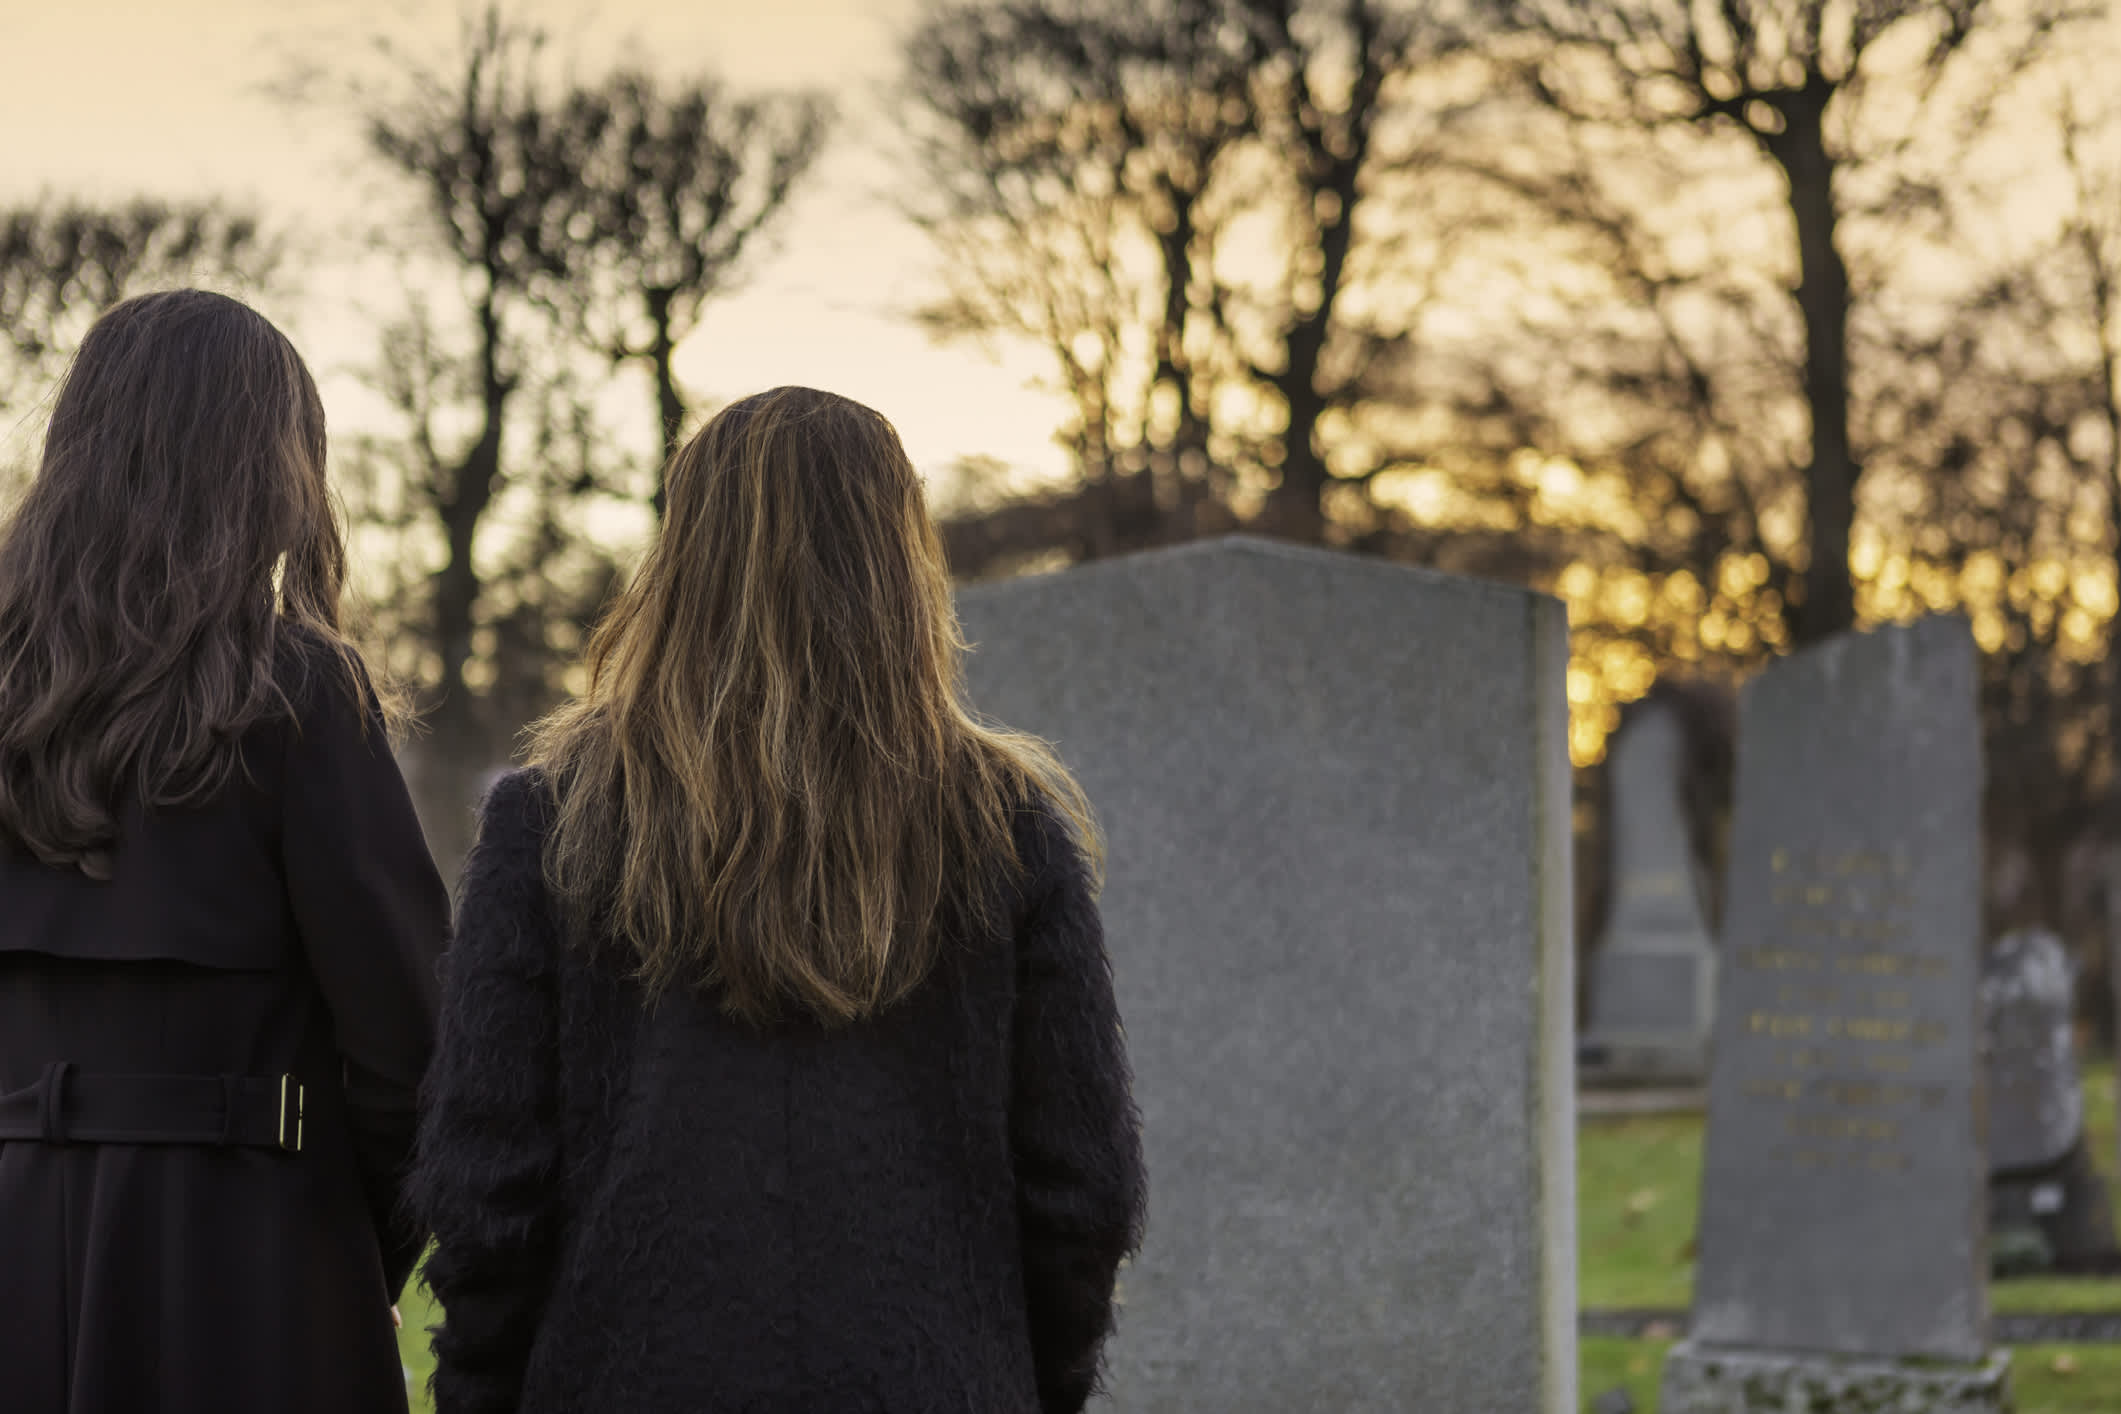 This is what happens to social security payments when someone dies